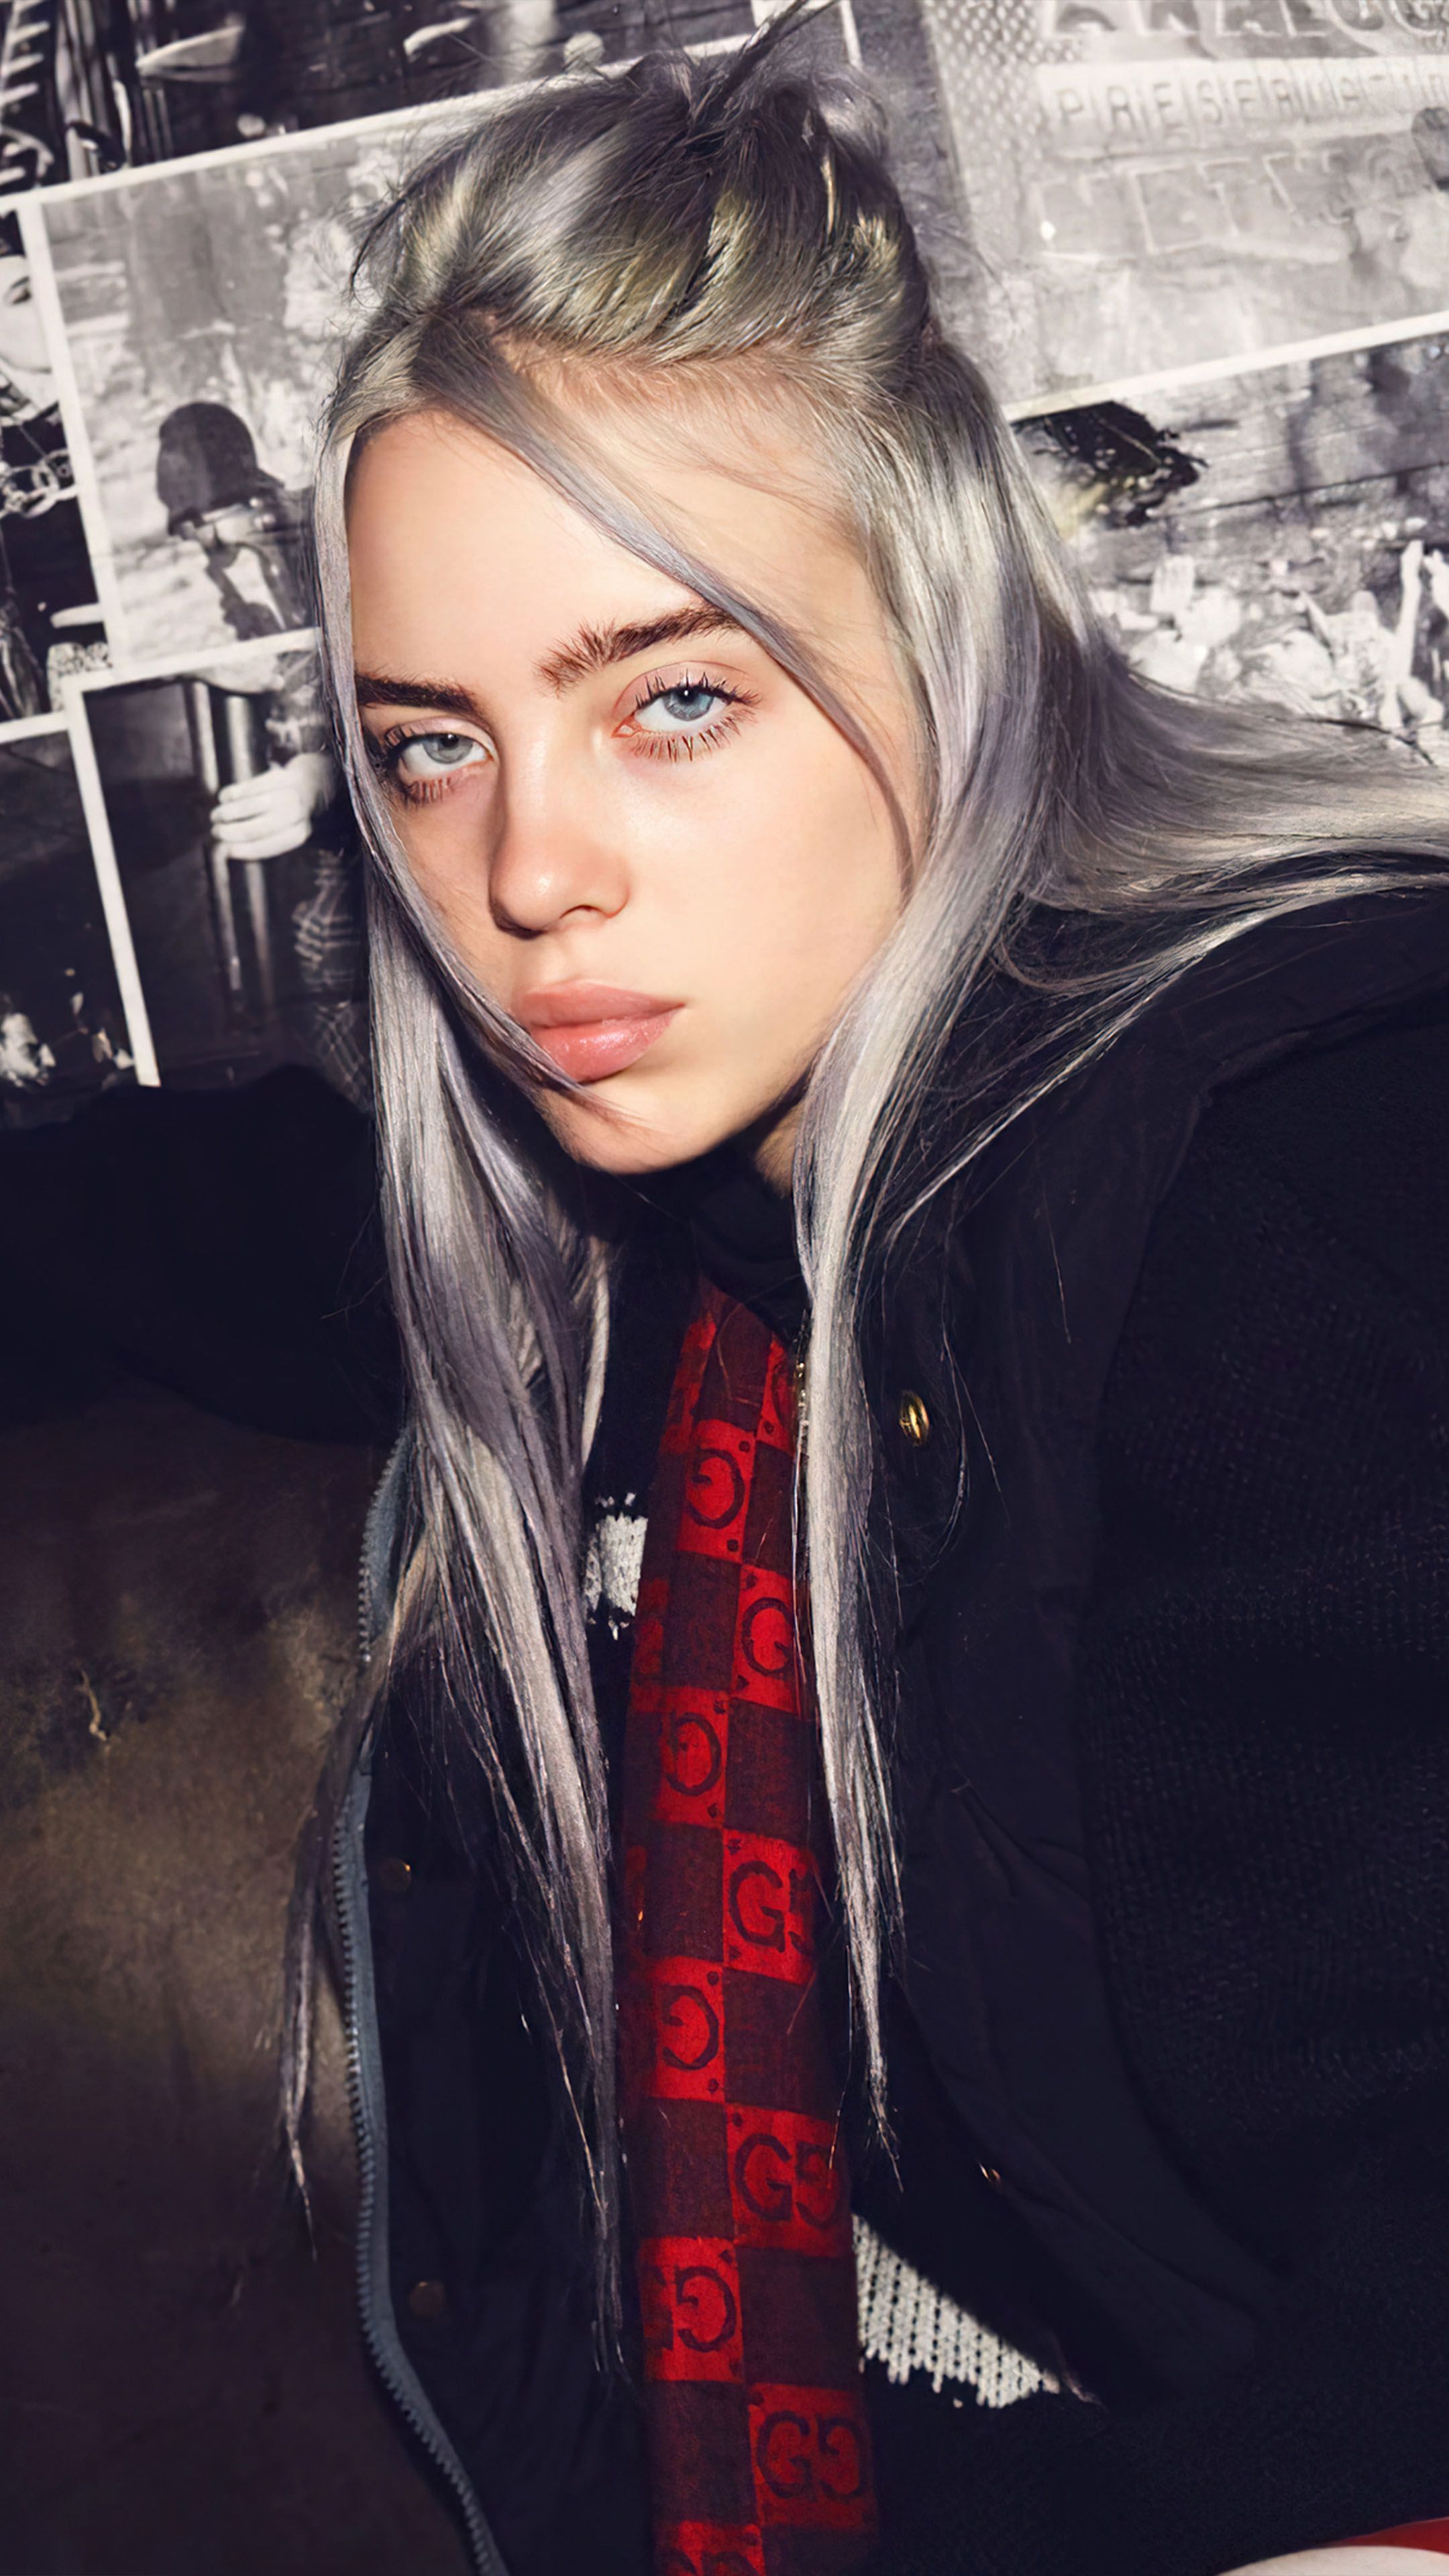 Billie Eilish's first album 'When We All Fall Asleep, Where Do We Go?' was released in 2019 and quickly became a sensation. - Billie Eilish